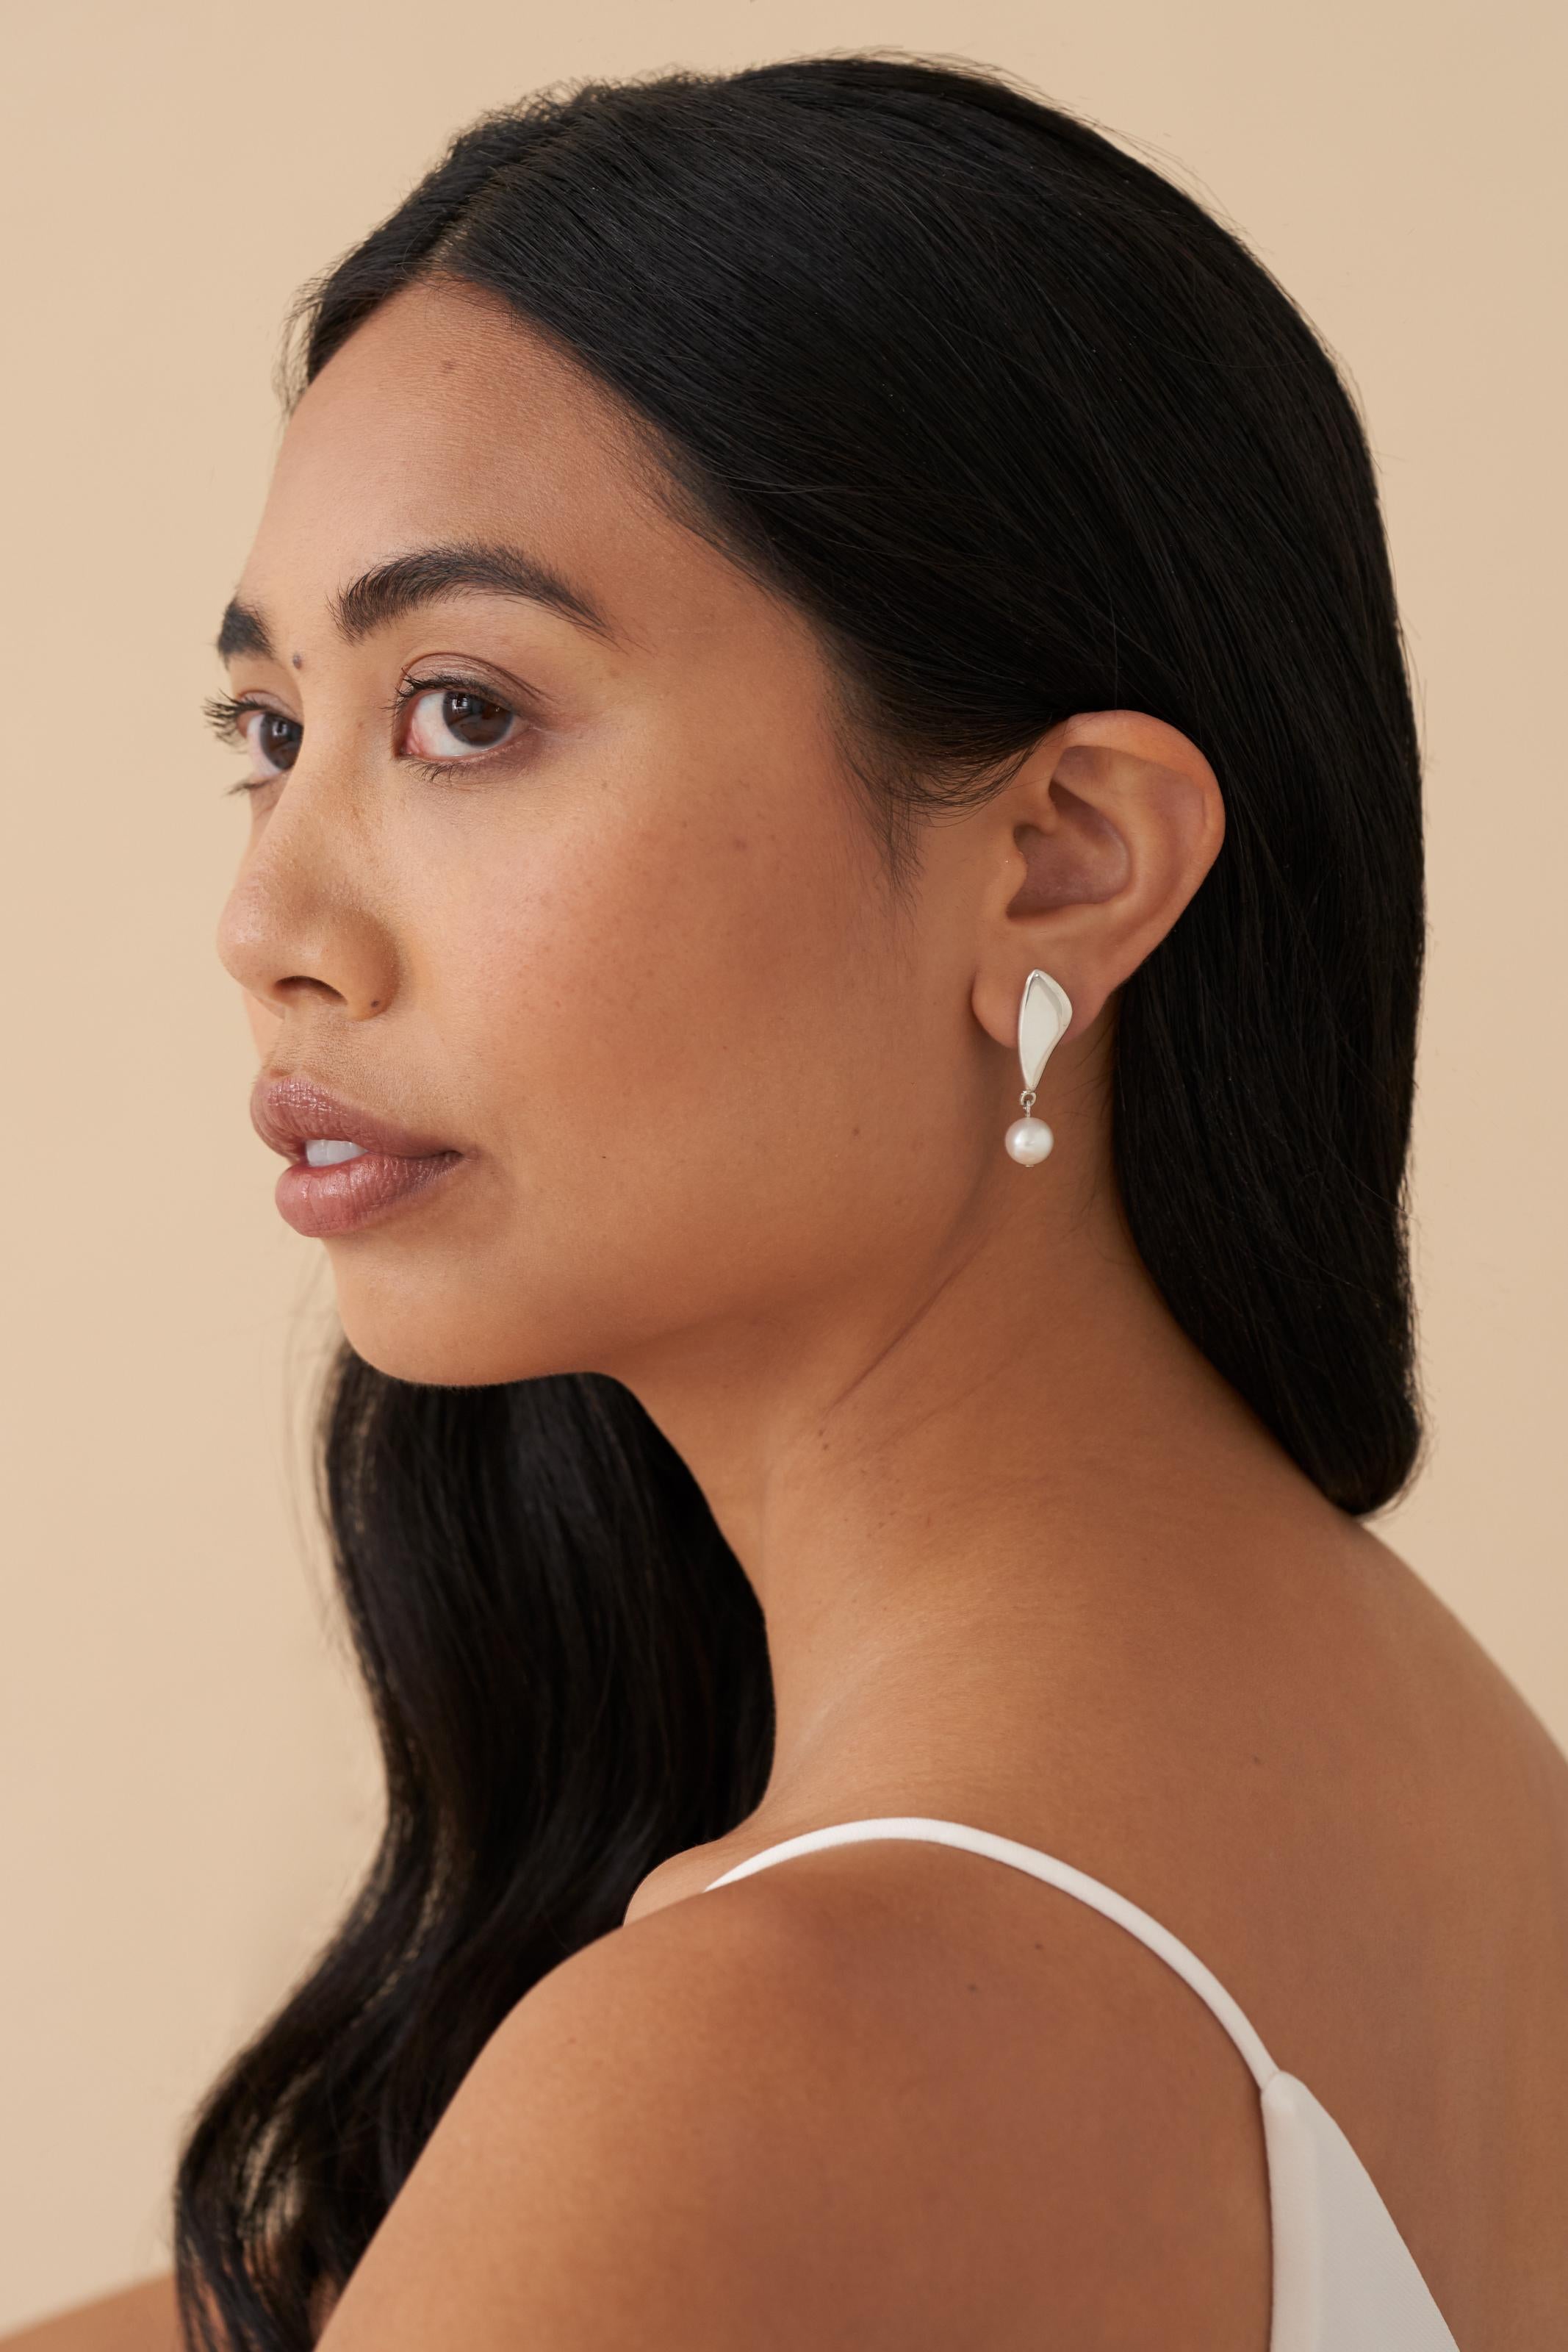  Playful yet chic, the Petal earrings are the perfect way to add a pop of color to your look. A classic style with timeless appeal, the Petal earrings are designed using high-quality metals and semi precious beads for a timelessly modern